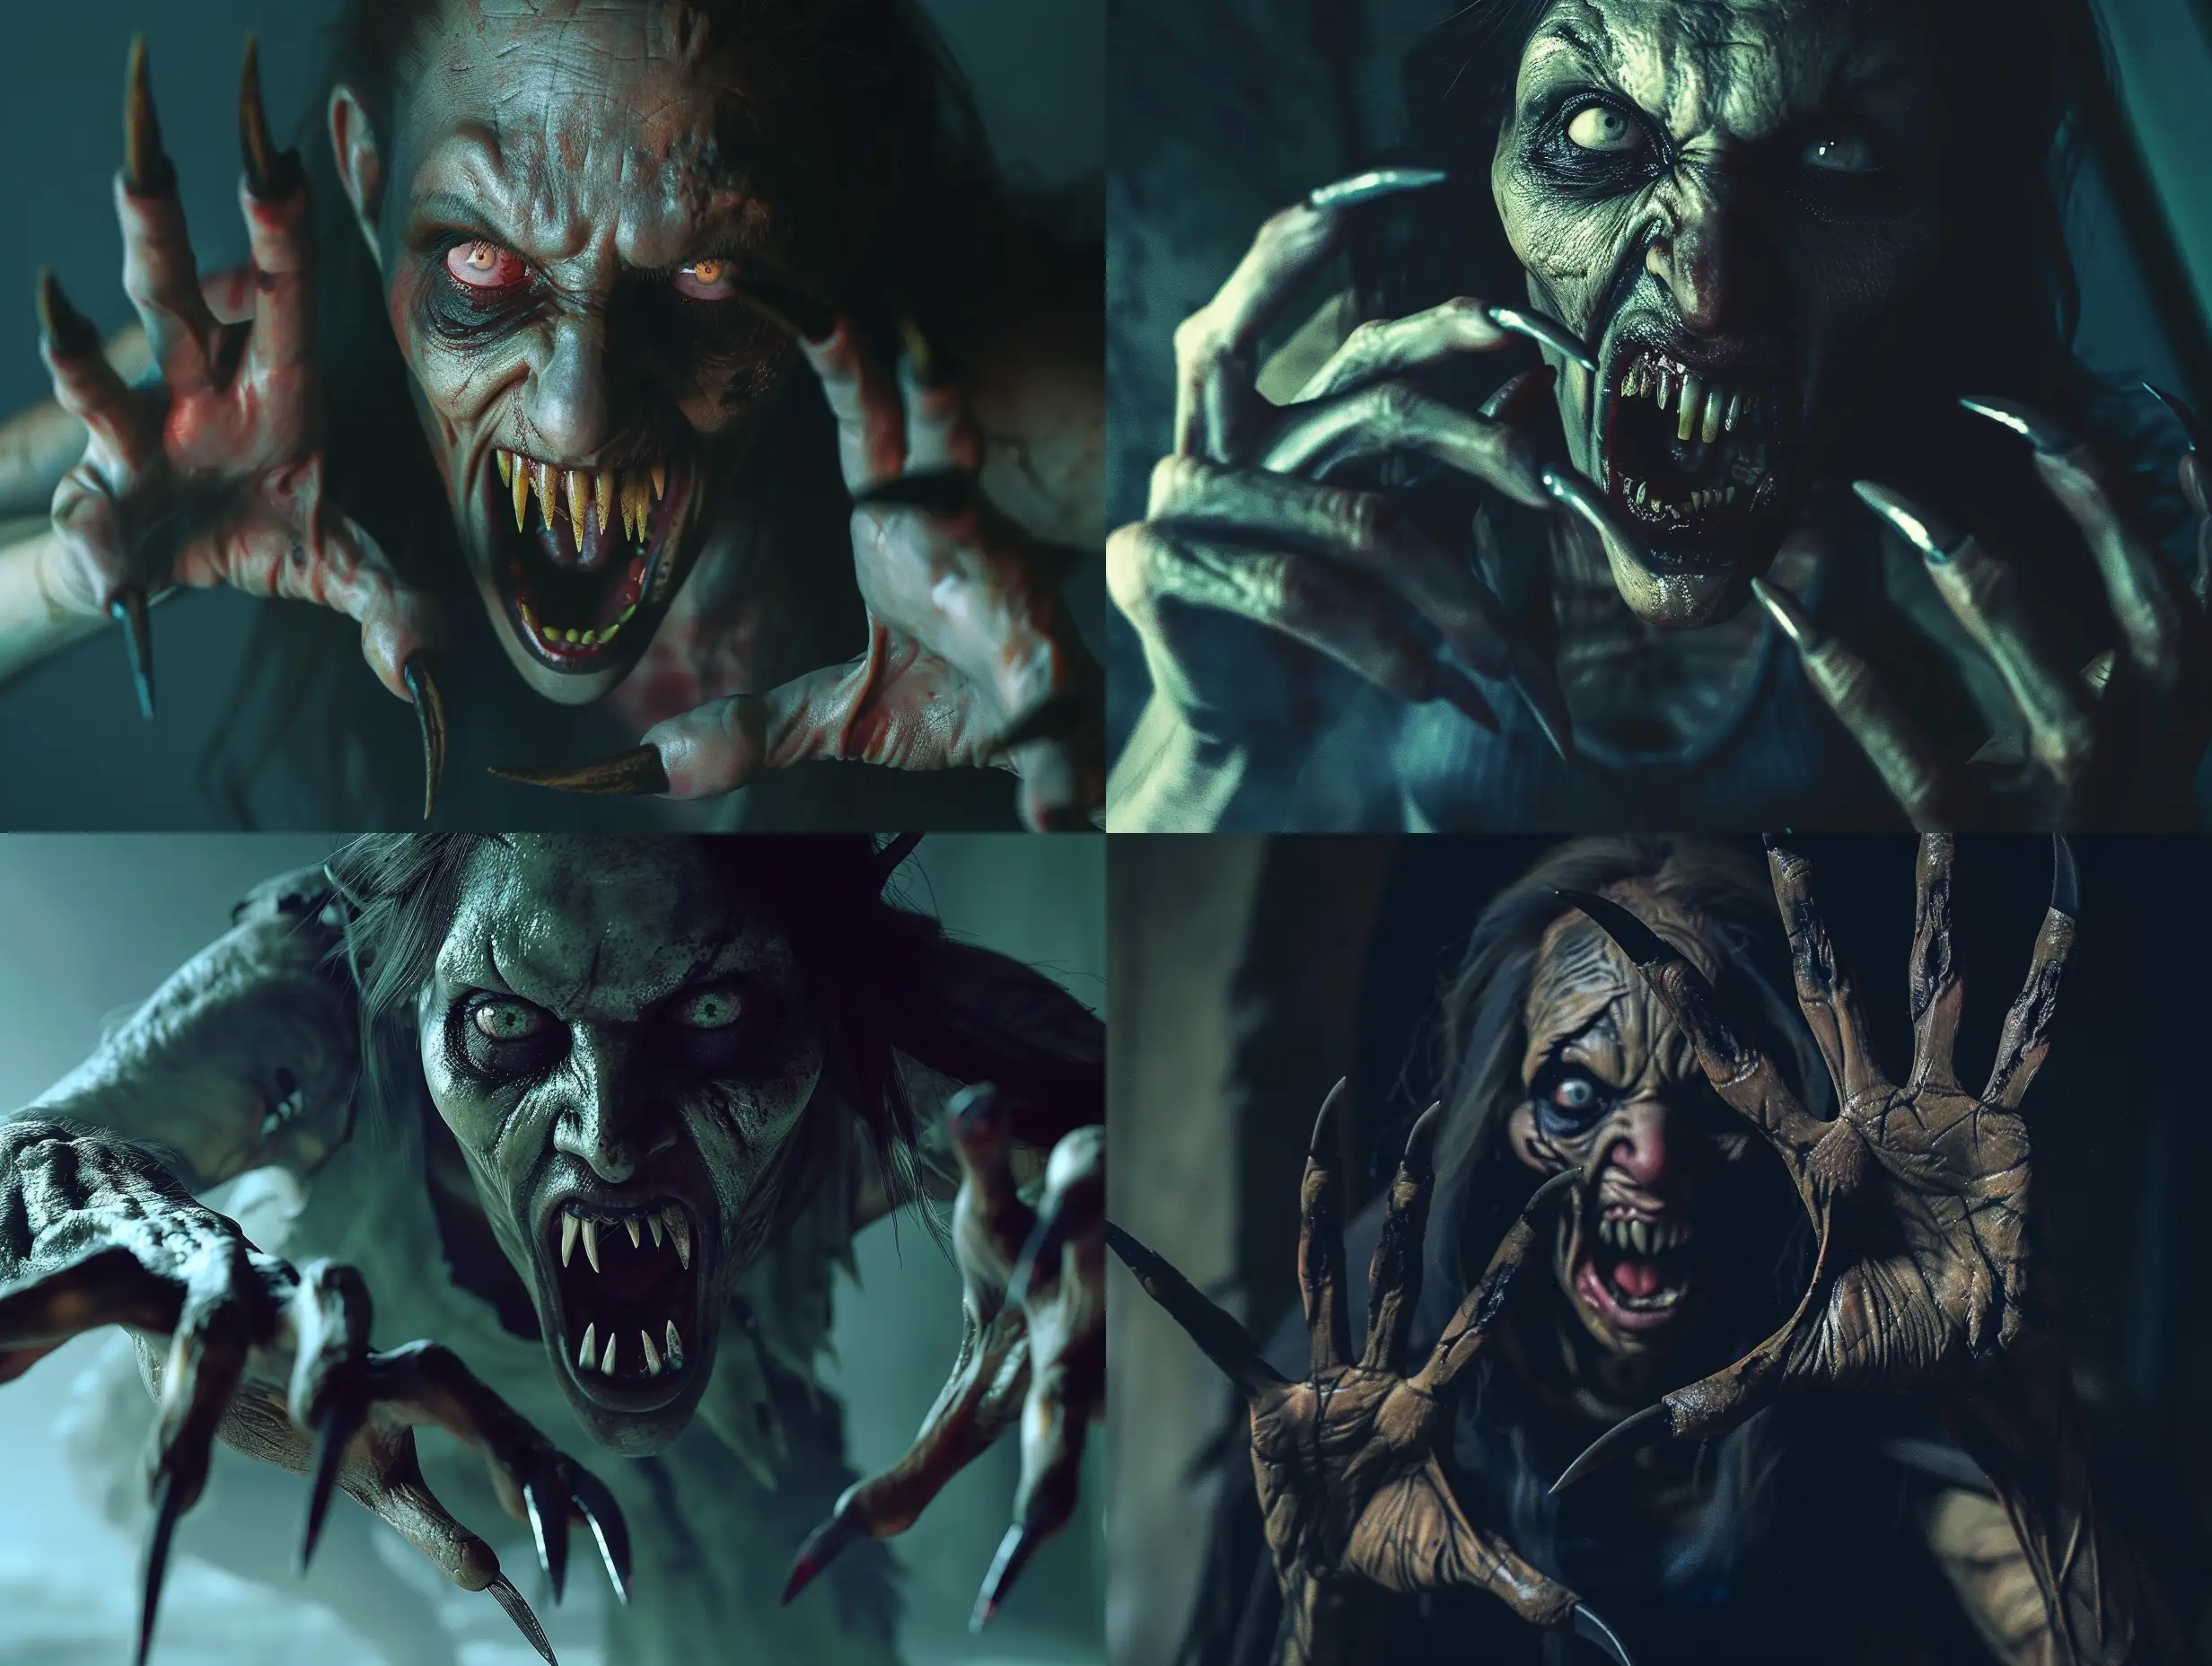 A hauntingly realistic scene of a nightmarish hungry ghoul female with clawed hands, her mouth agape, revealing a frightening display of pointed teeth resembling predatory fangs. She appears to be lurching towards you with long, pointed nails that are almost grotesquely reminiscent of beast claws.her eyes are a vacant, under atmospheric lighting in a full anatomical depiction, set in a night-time setting that is very clear without flaws, horror, photorealism, detailed, textured, dark, haunting, night-time scene, intense, creepy, undead, spooky, eerie, atmospheric lighting, nightmare, grotesque, terrifying, realistic anatomy.